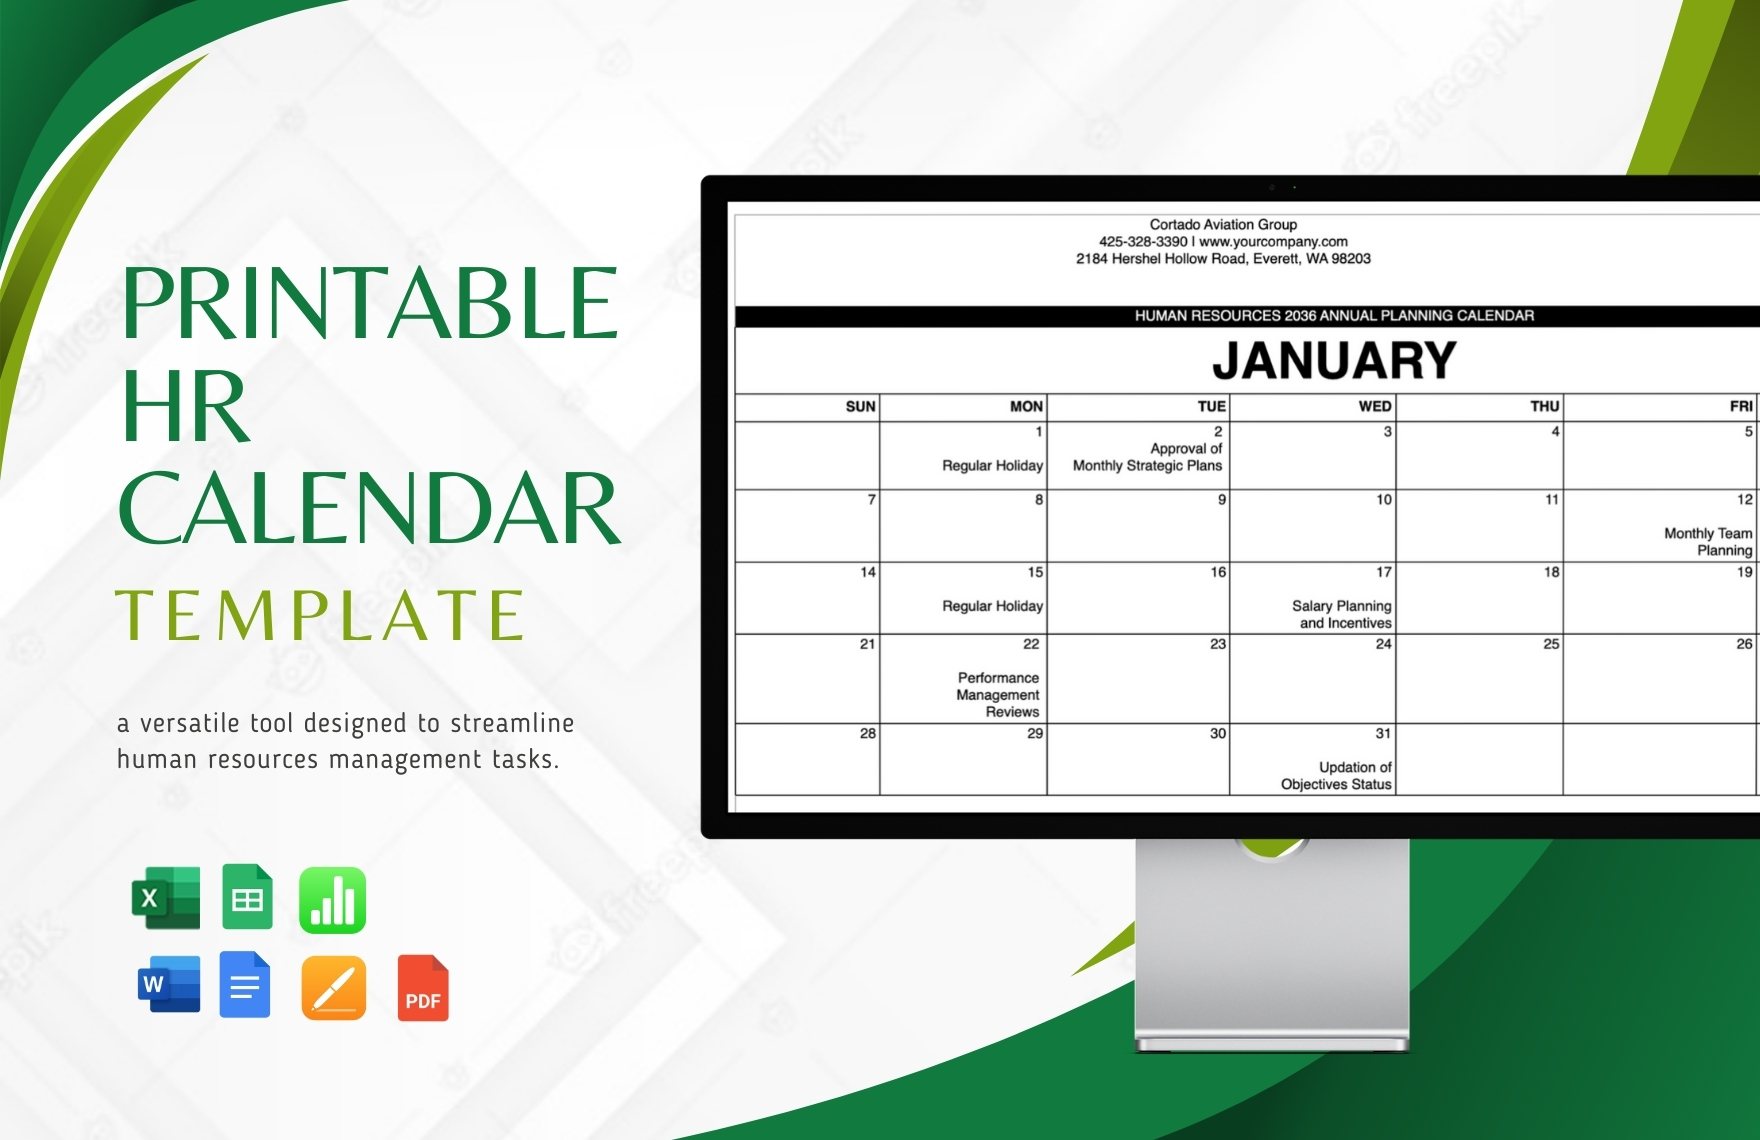 Printable HR Calendar Template in Word, Google Docs, Excel, PDF, Google Sheets, Apple Pages, Apple Numbers